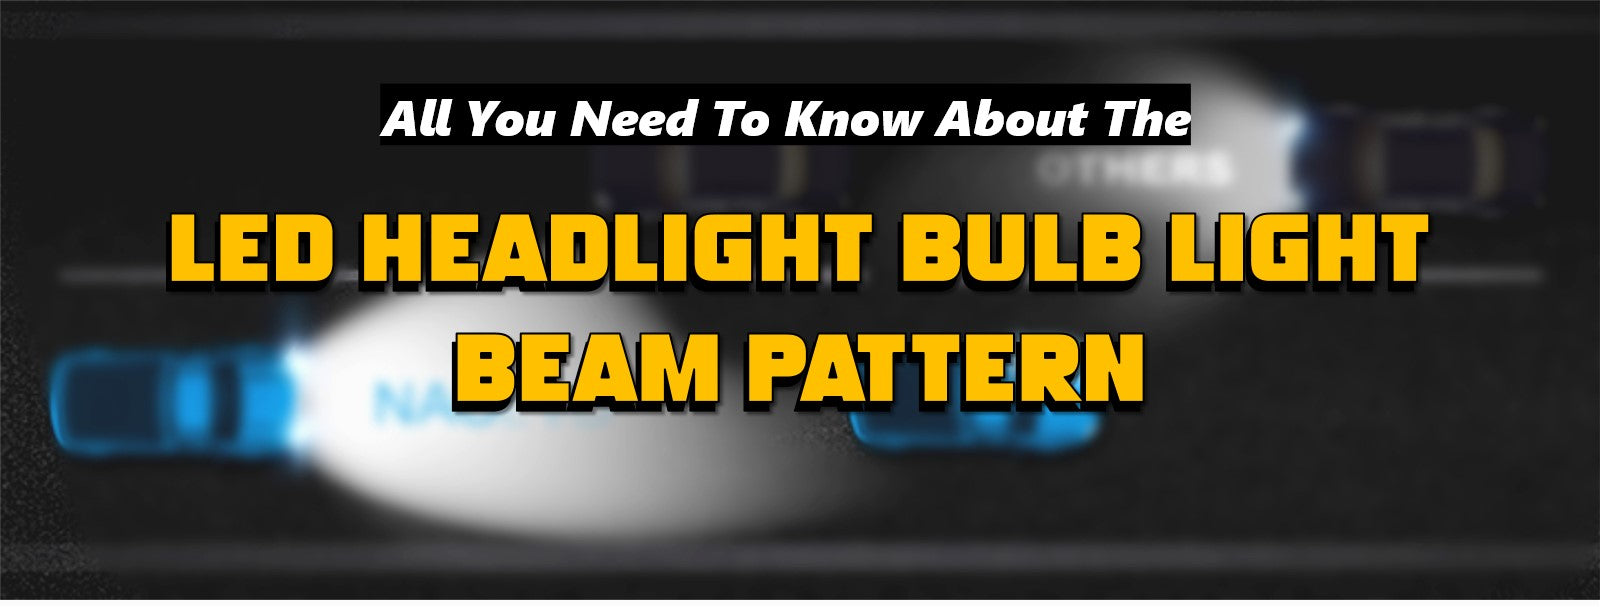 LED Headlight Bulb Light Beam Pattern - All You Need to Know